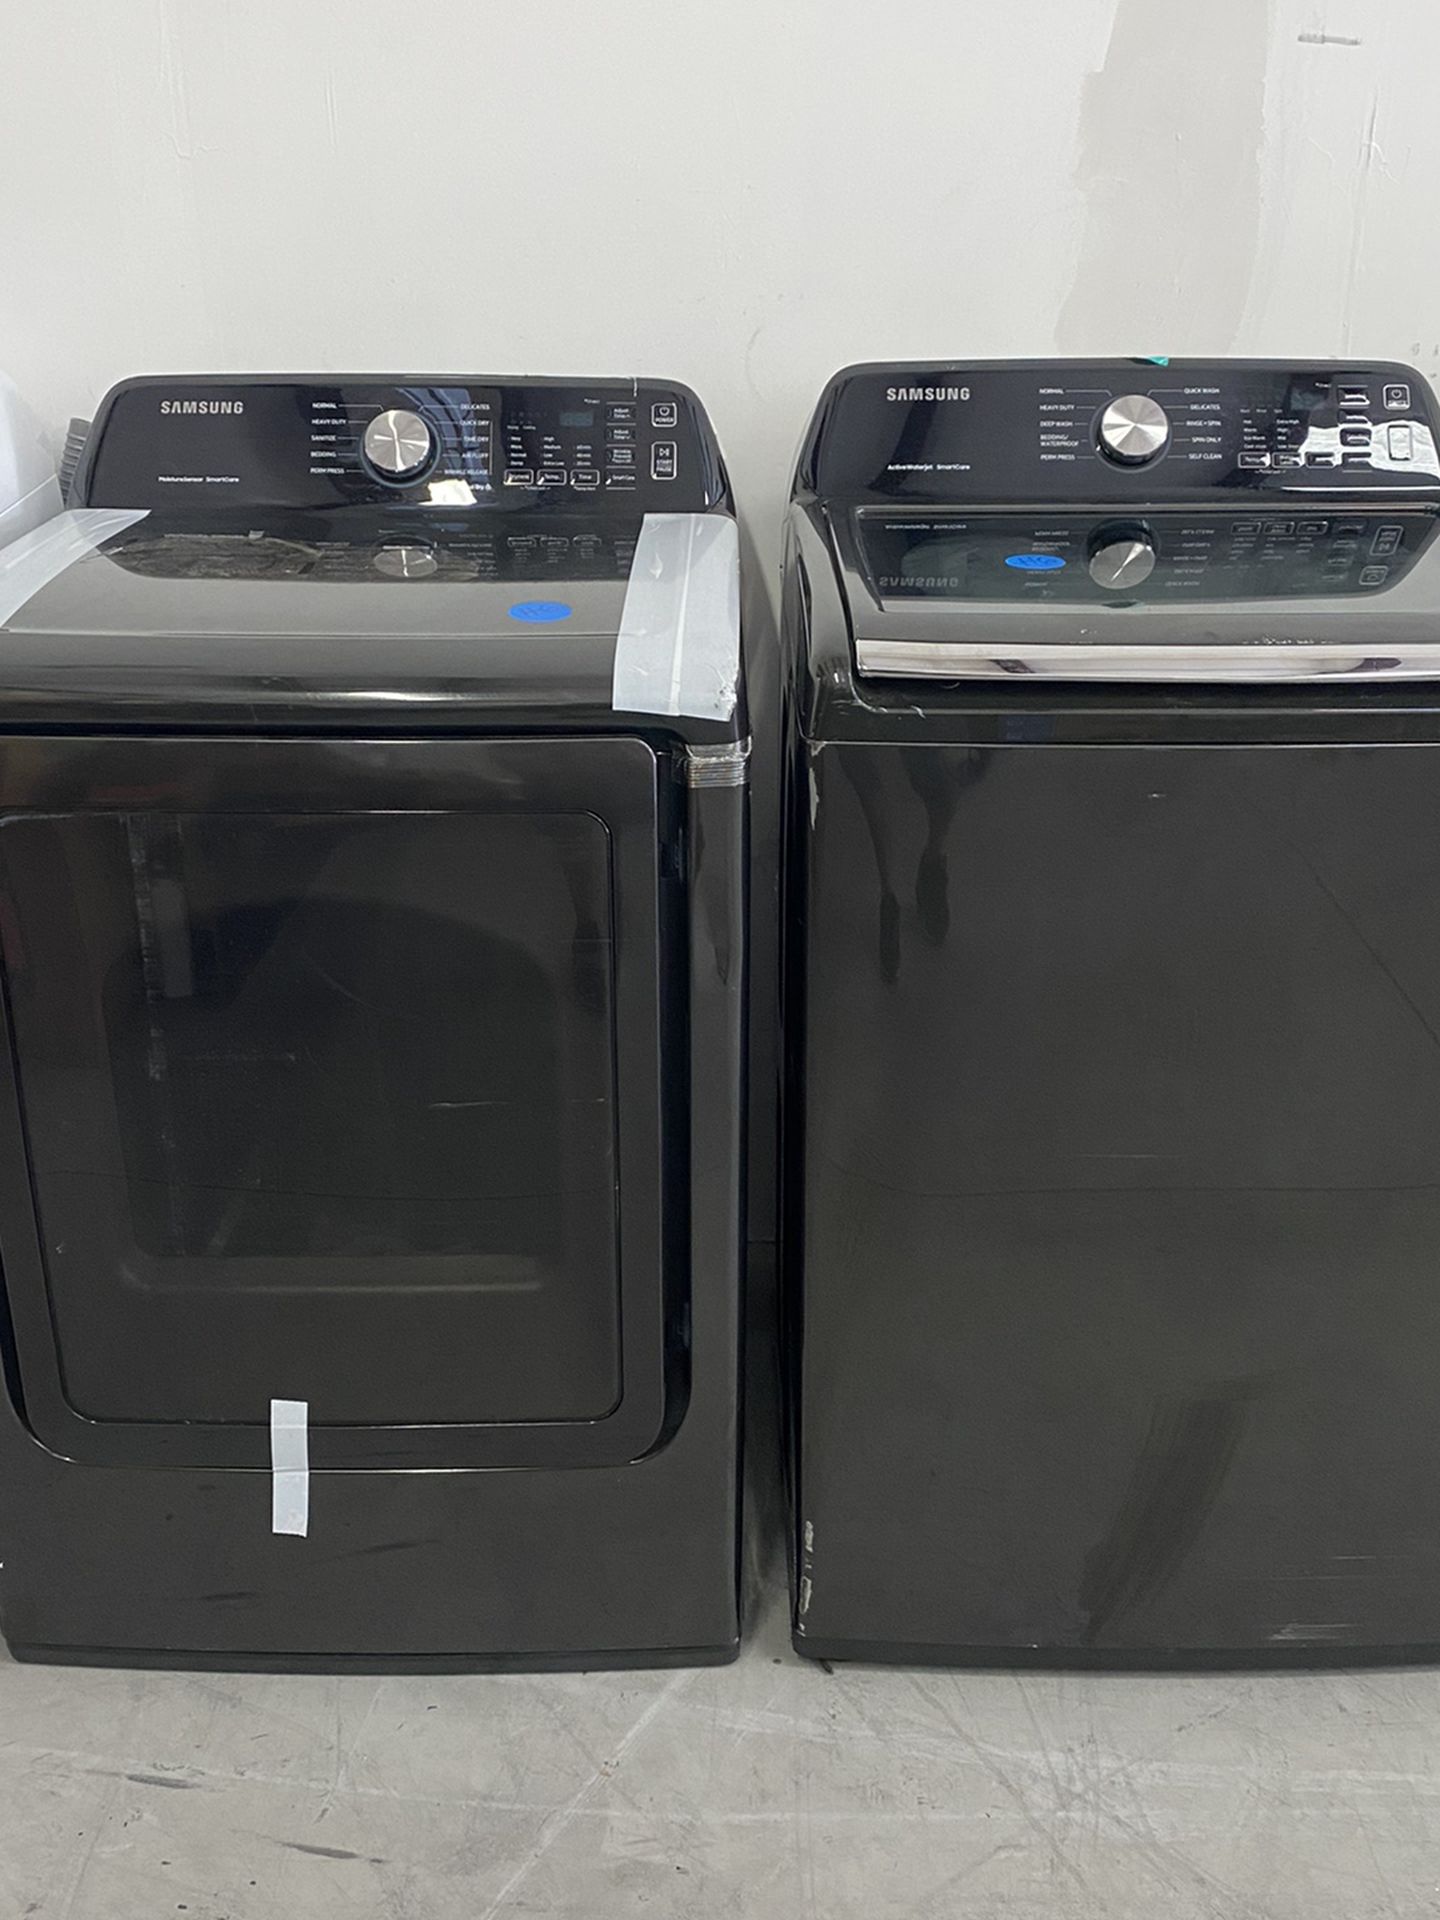 Set Washer And Dryer Samsung New Scratch And Dents 